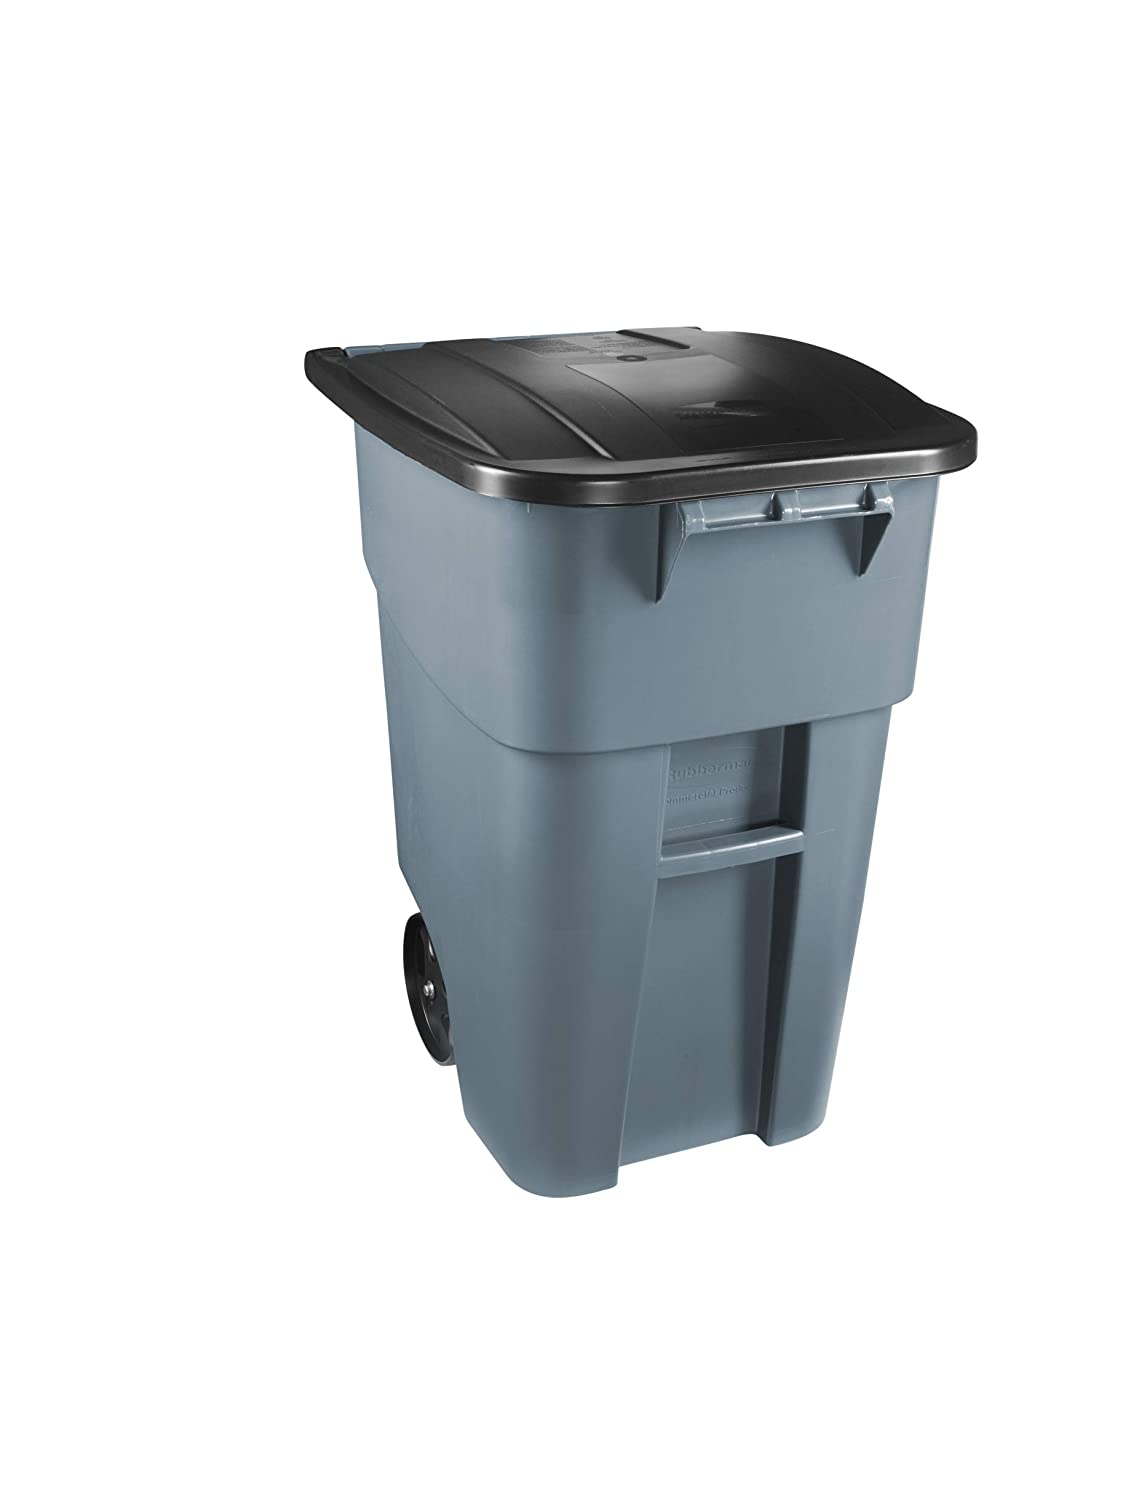 Rubbermaid Commercial Products Portable Lidded Outdoor Trash Can, 50-Gallon